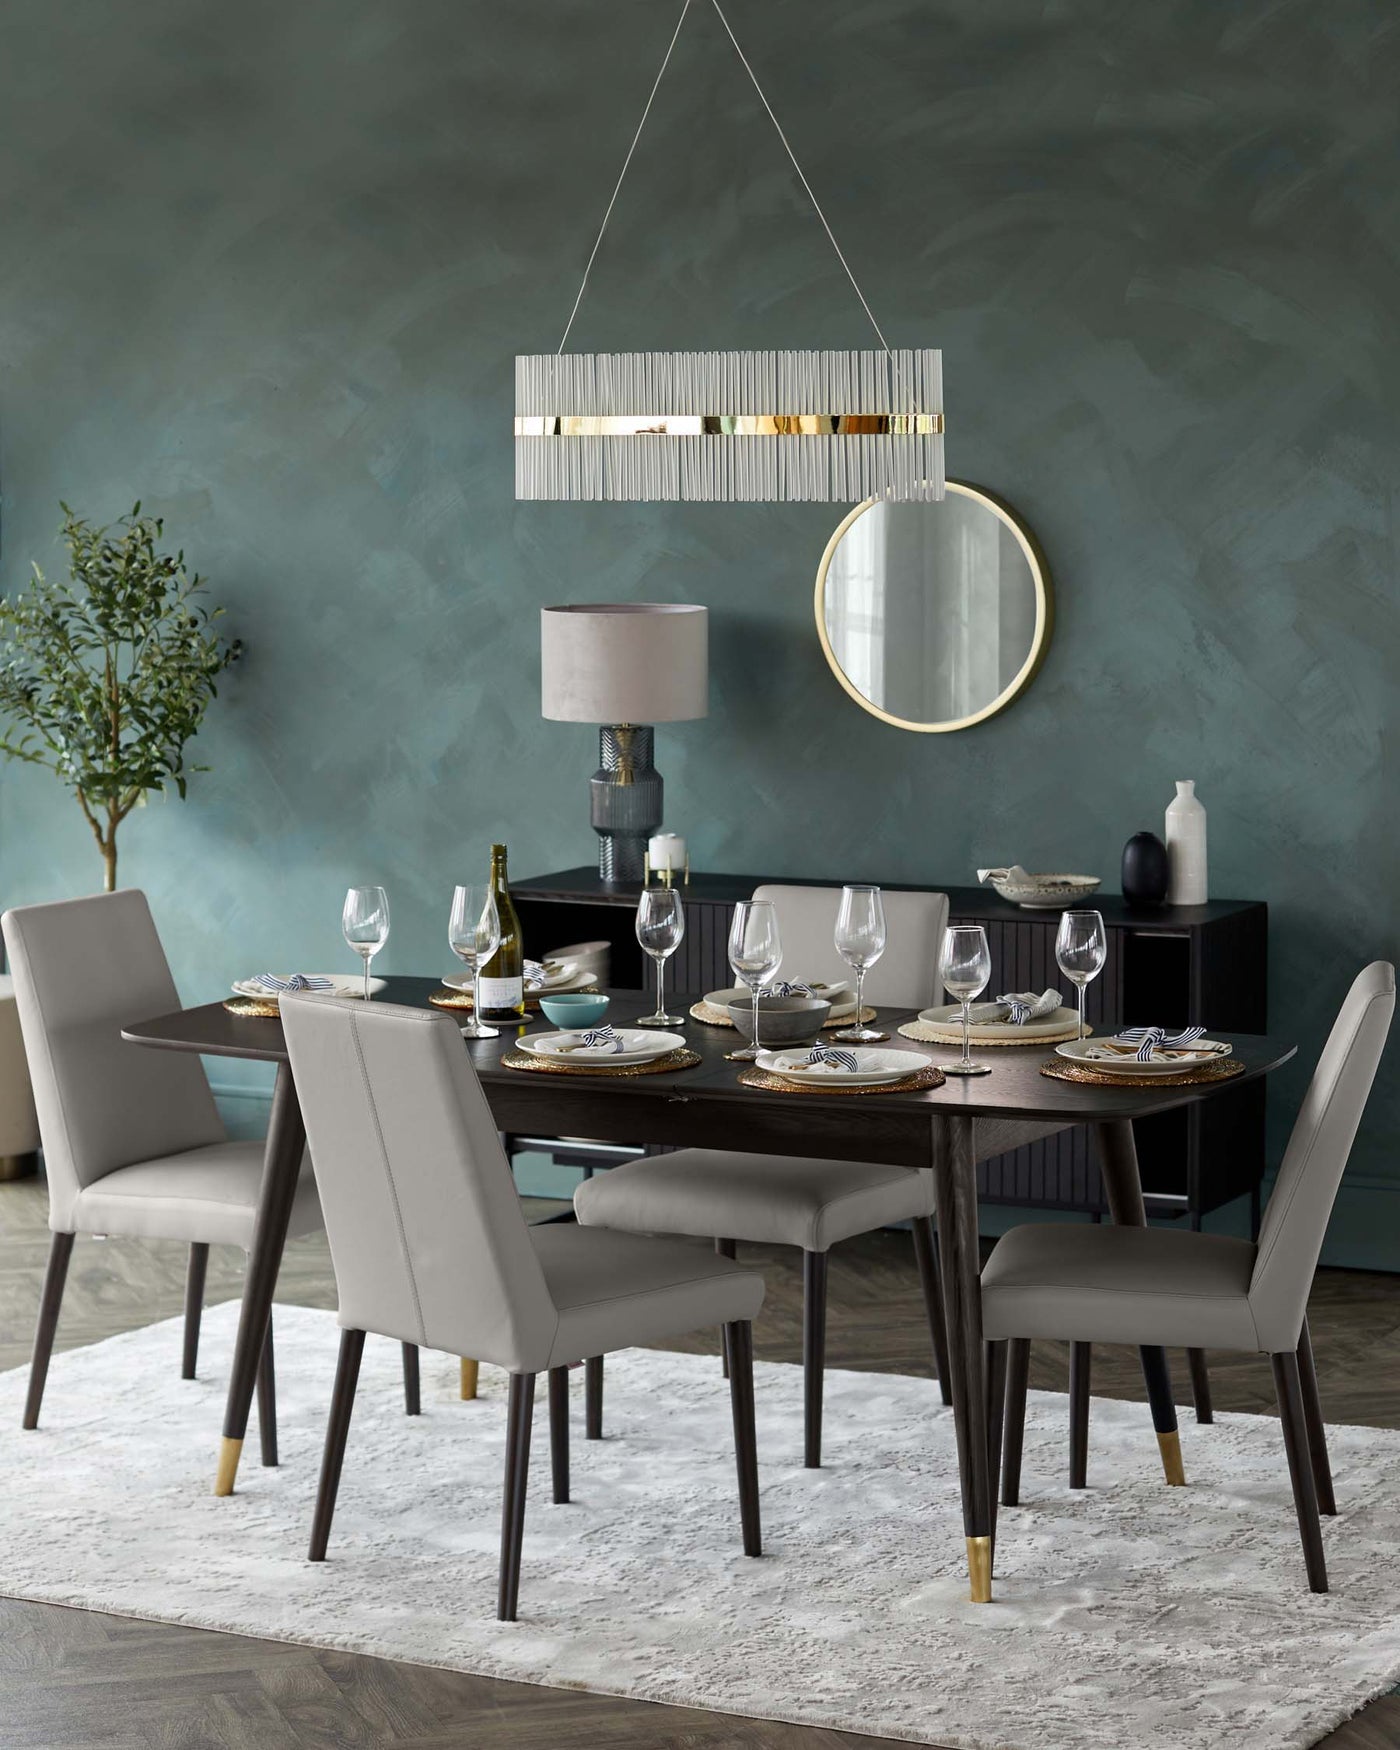 Contemporary dining set featuring a rectangular table with dark wooden finish and tapered legs tipped with brass caps, surrounded by six upholstered chairs in a matching grey fabric. The table is set with elegant dinnerware, glasses, and a bottle of wine, ready for a sophisticated meal. A large rectangular pendant light with vertical slats and golden accents hangs above, complementing the modern, stylish aesthetic of the dining area.